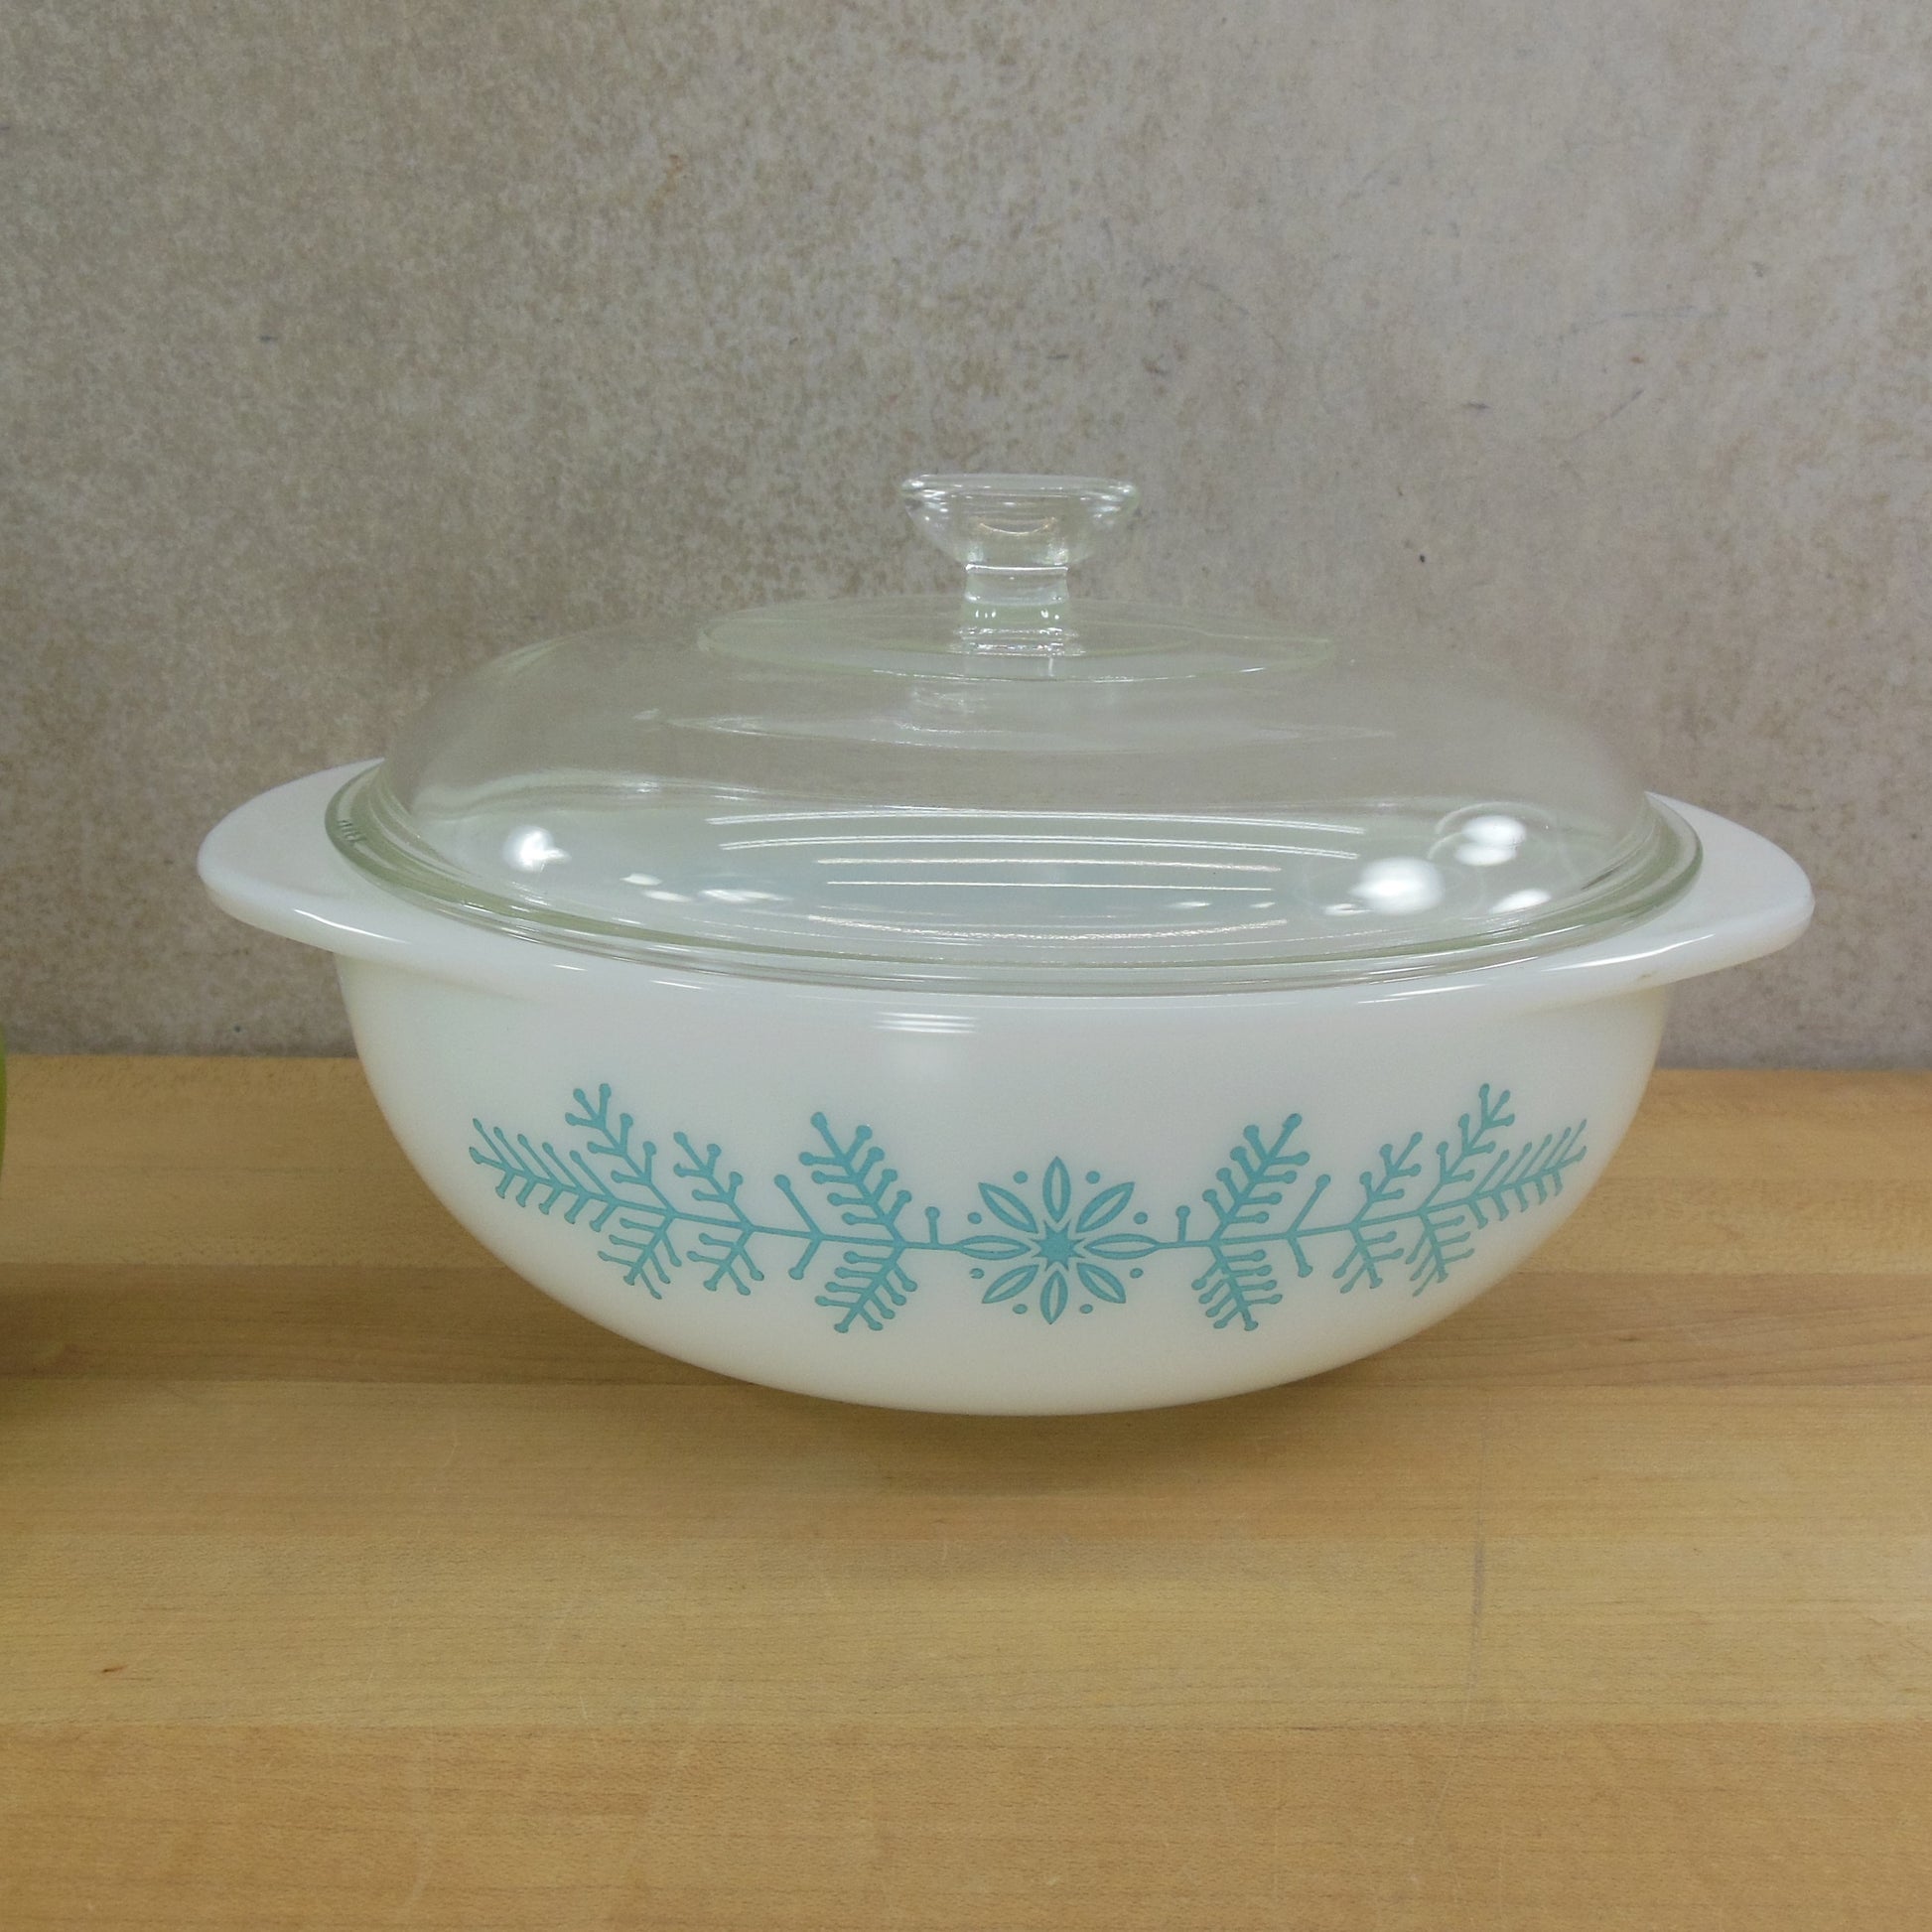 Pyrex Glass USA 1962 Promotional Casserole Dish & Lid Frost Garland Turquoise